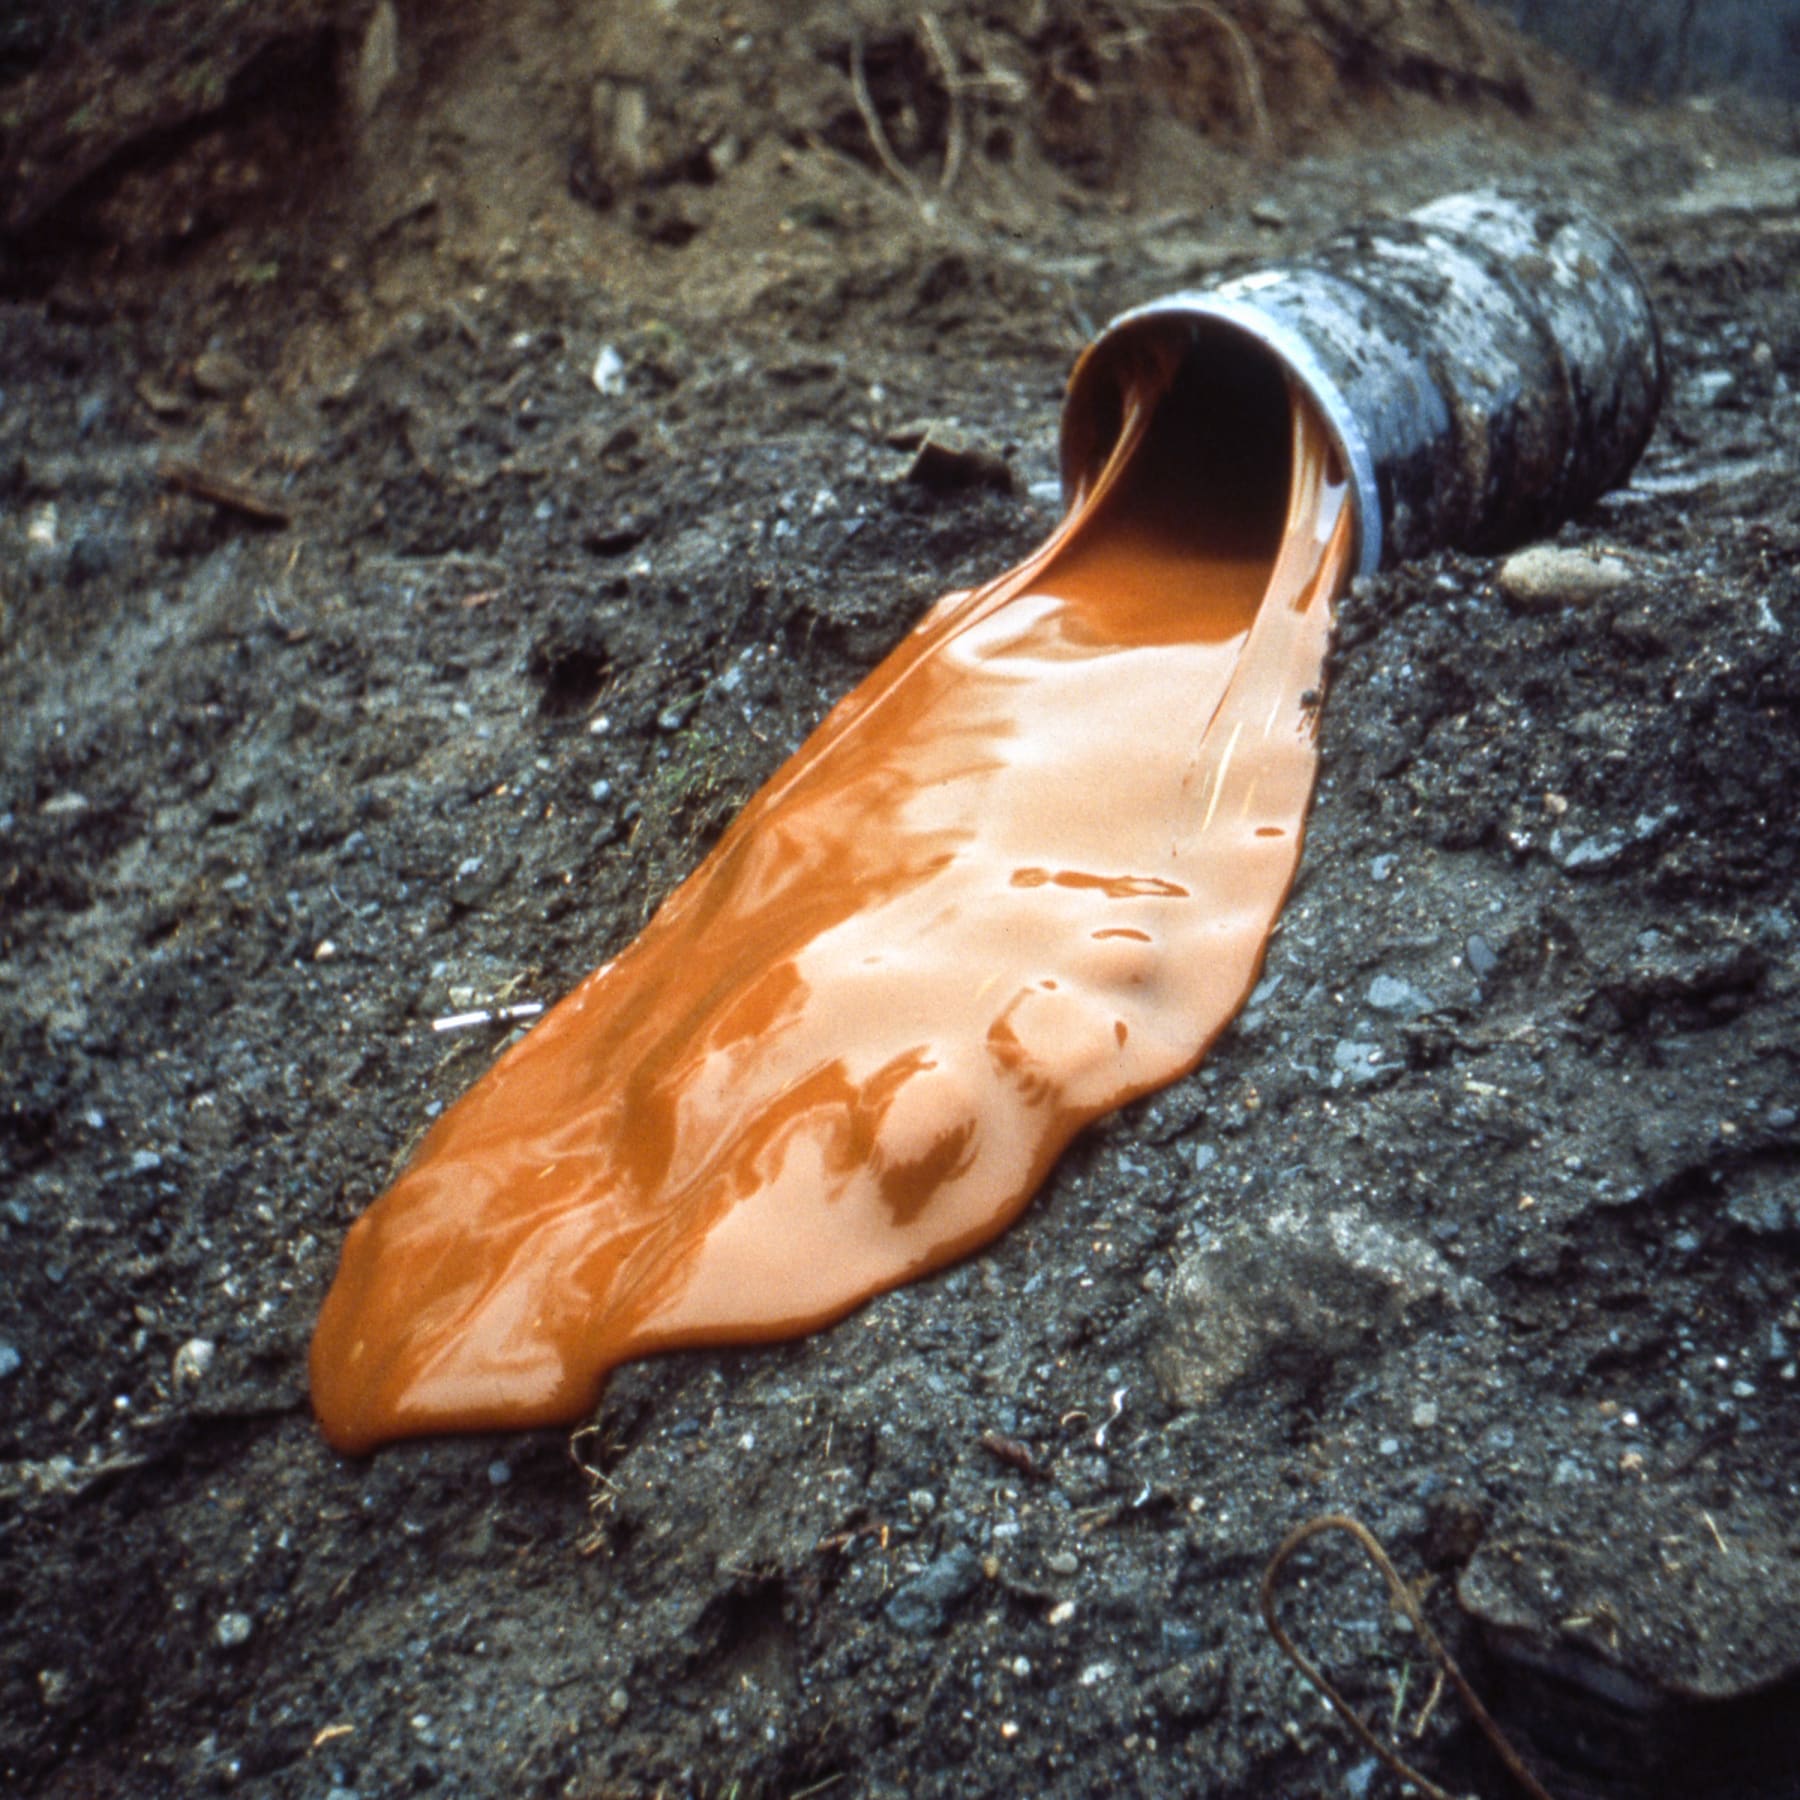 An image containing a large drum of glue at the crest of a hill and a tipped container. Earthwork by Robert Smithson